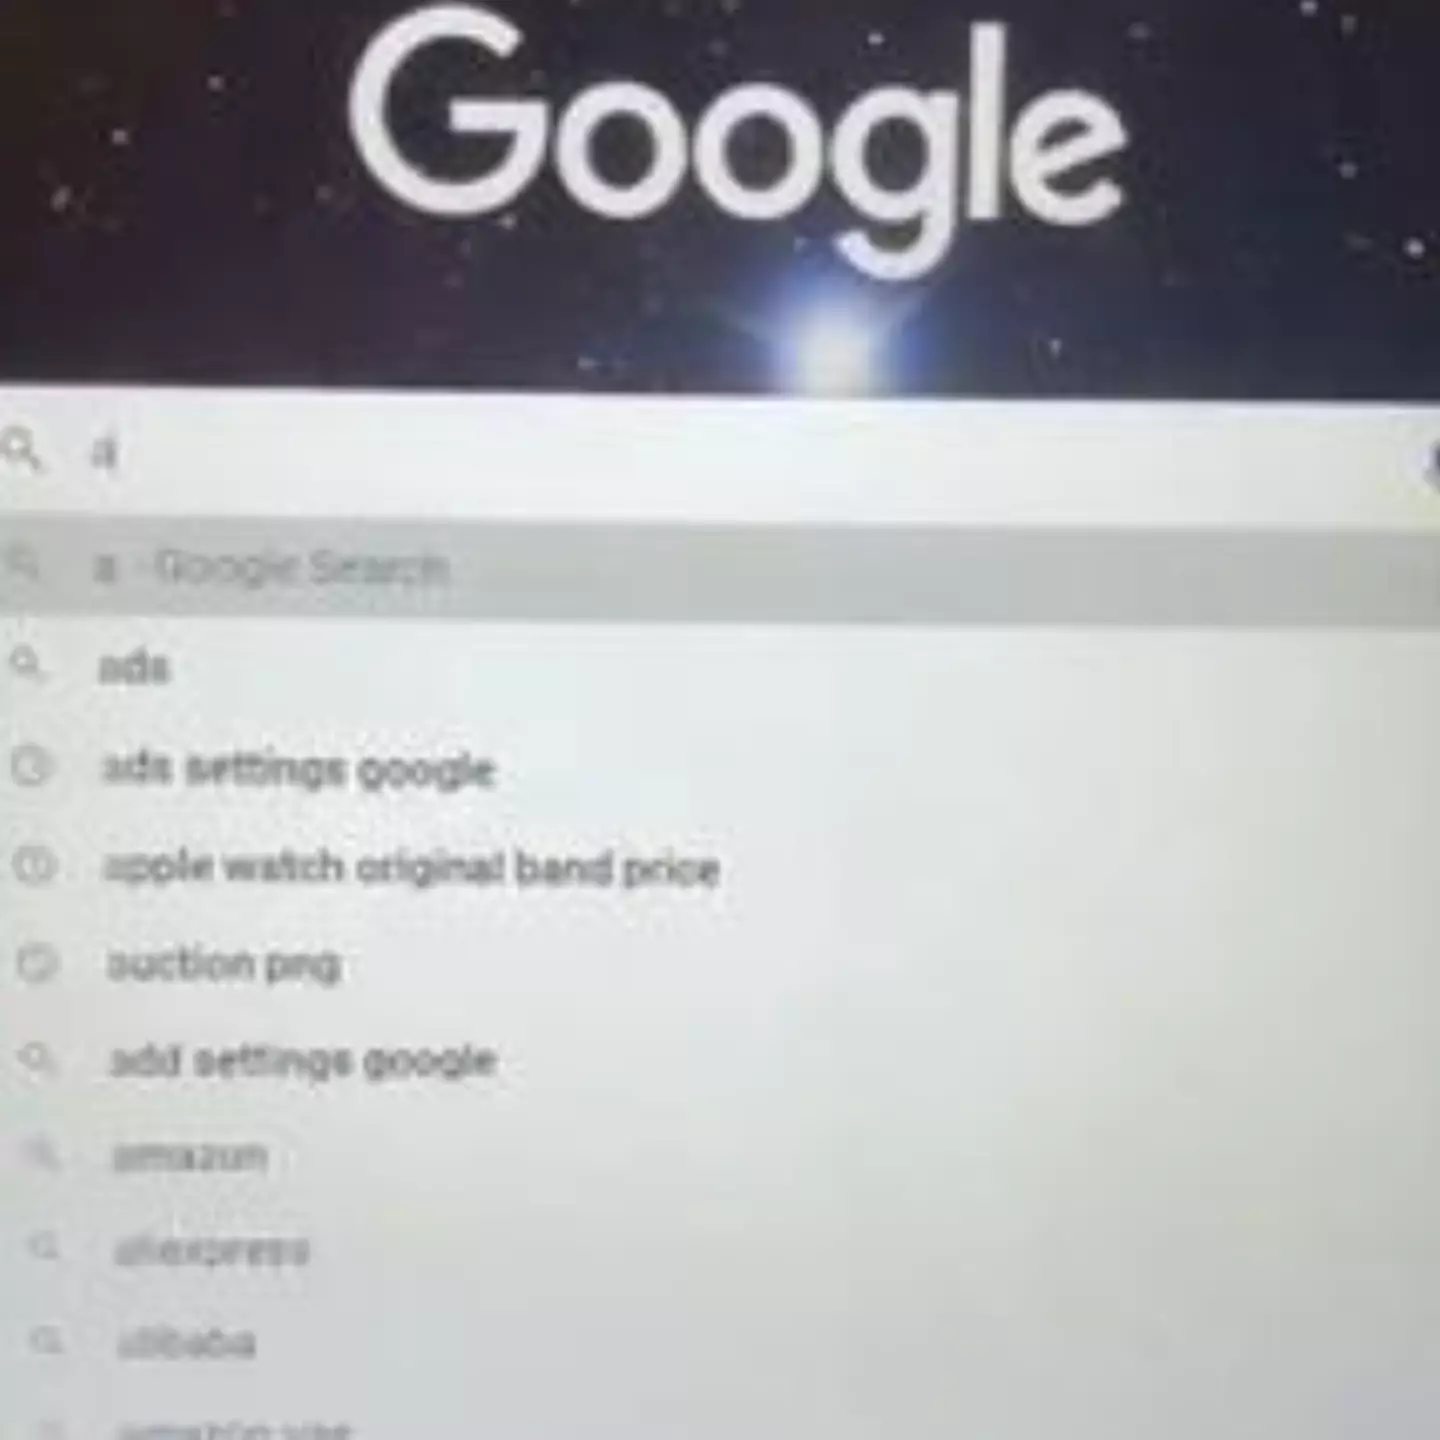 Woman shows how to find out everything Google knows about you